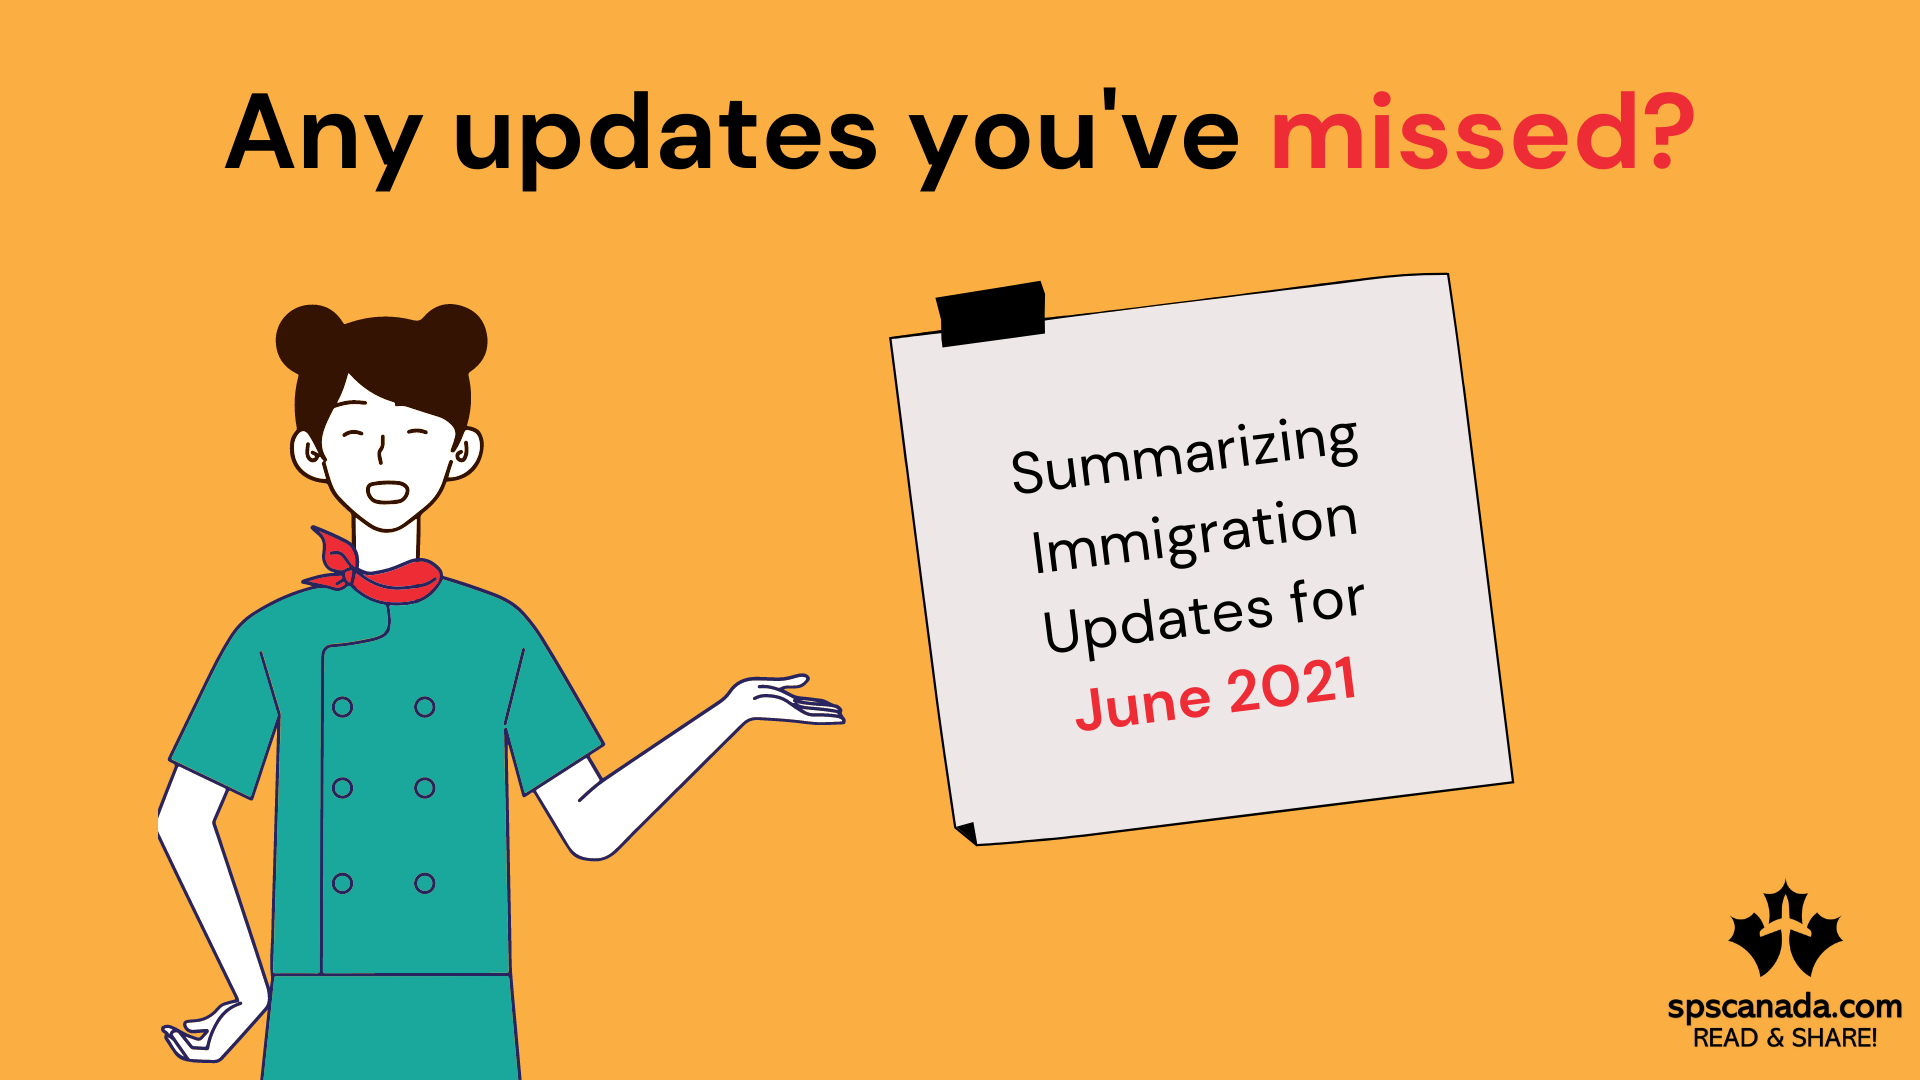 Month-end Immigration Updates for June 2021 - What did you miss?